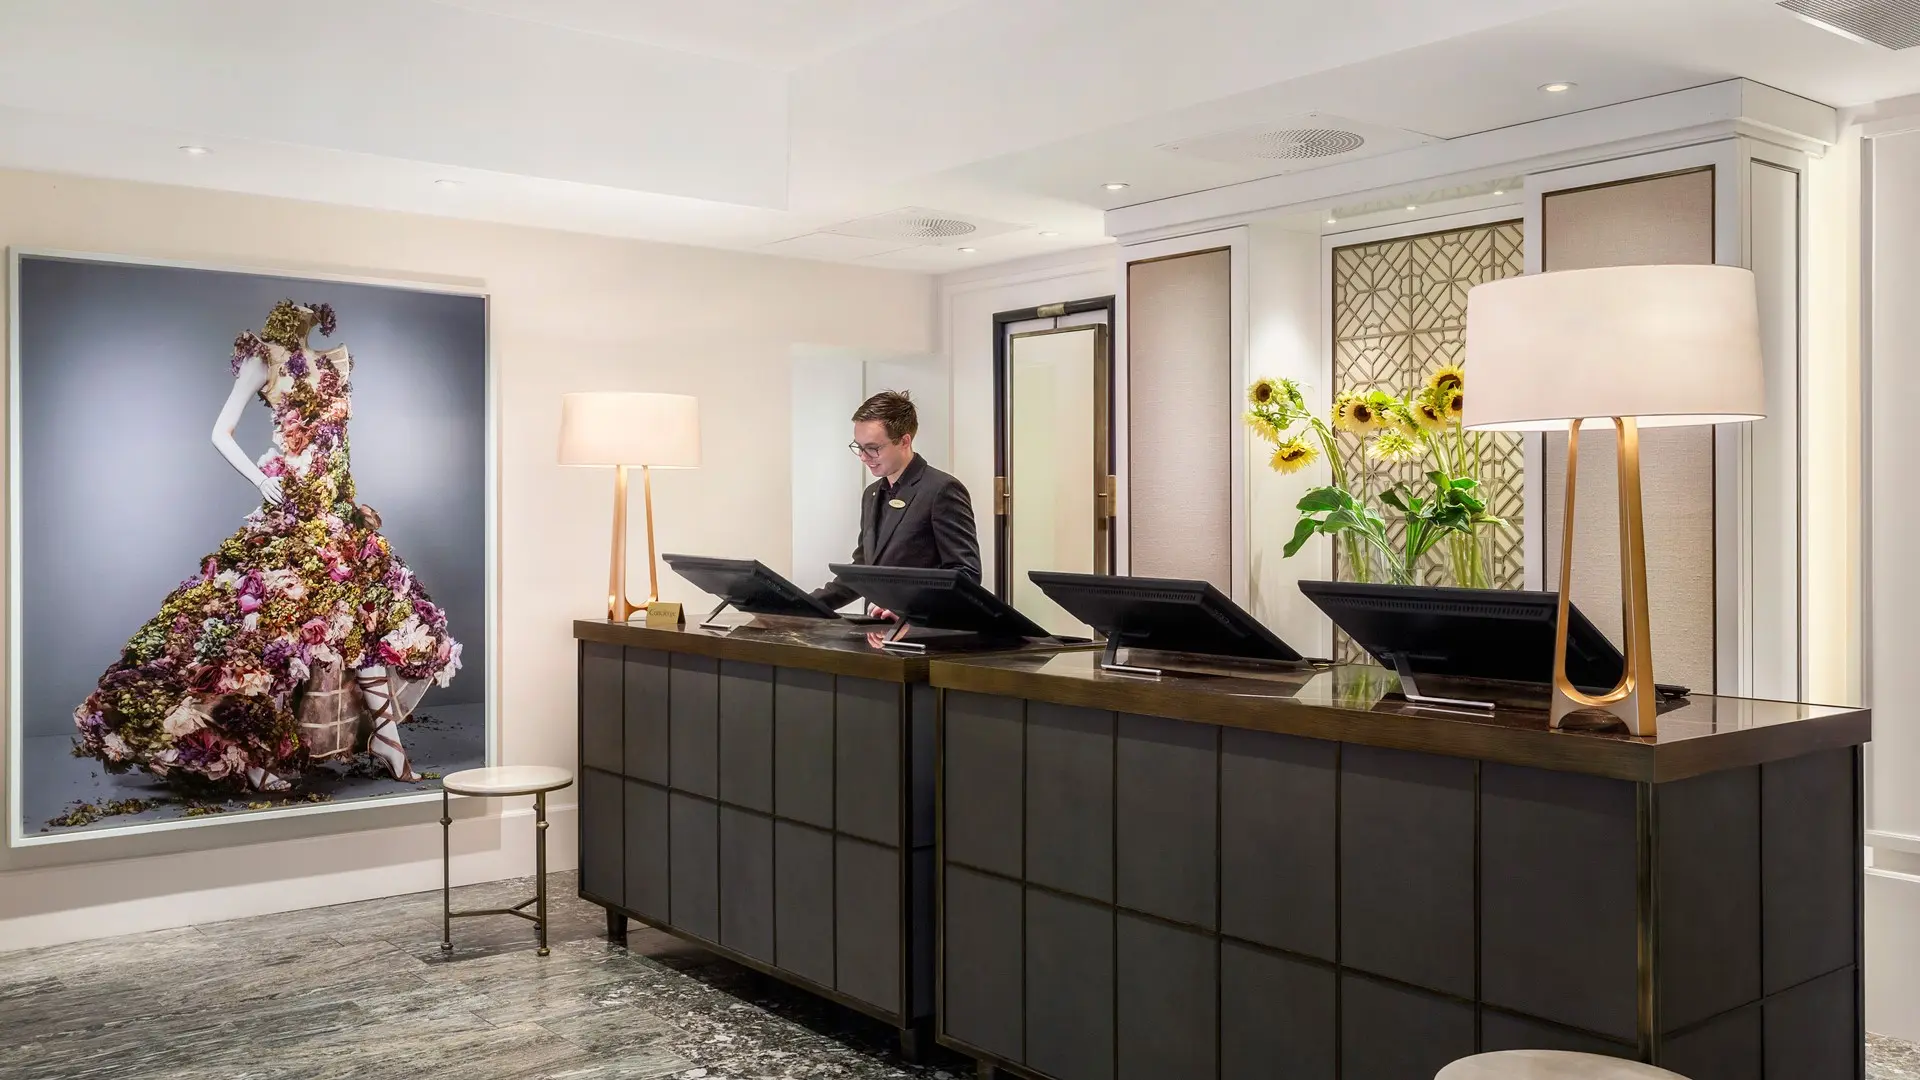 Hotel review Service & Facilities' - Hotel Continental - 0